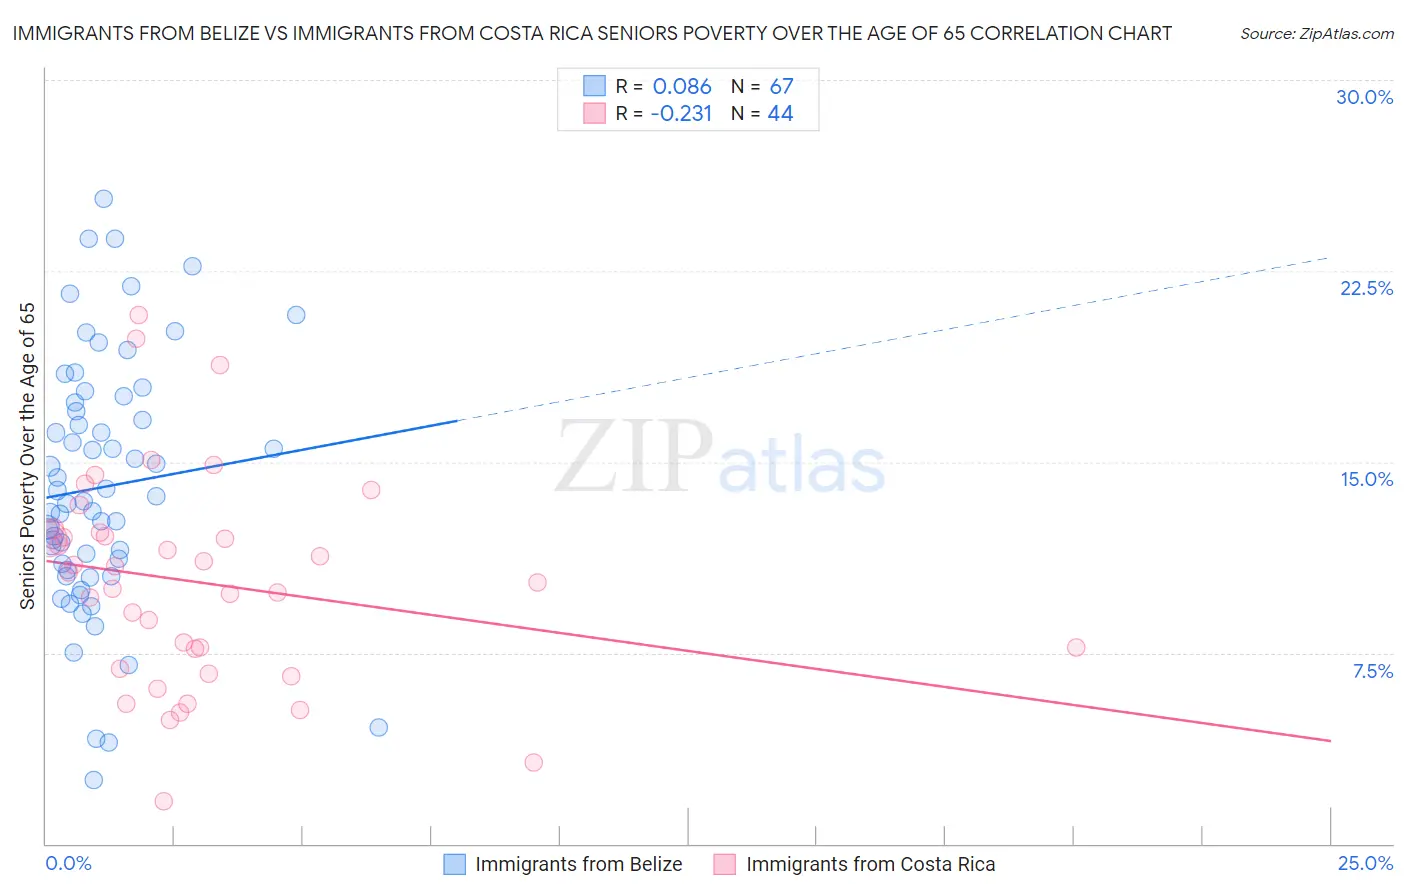 Immigrants from Belize vs Immigrants from Costa Rica Seniors Poverty Over the Age of 65